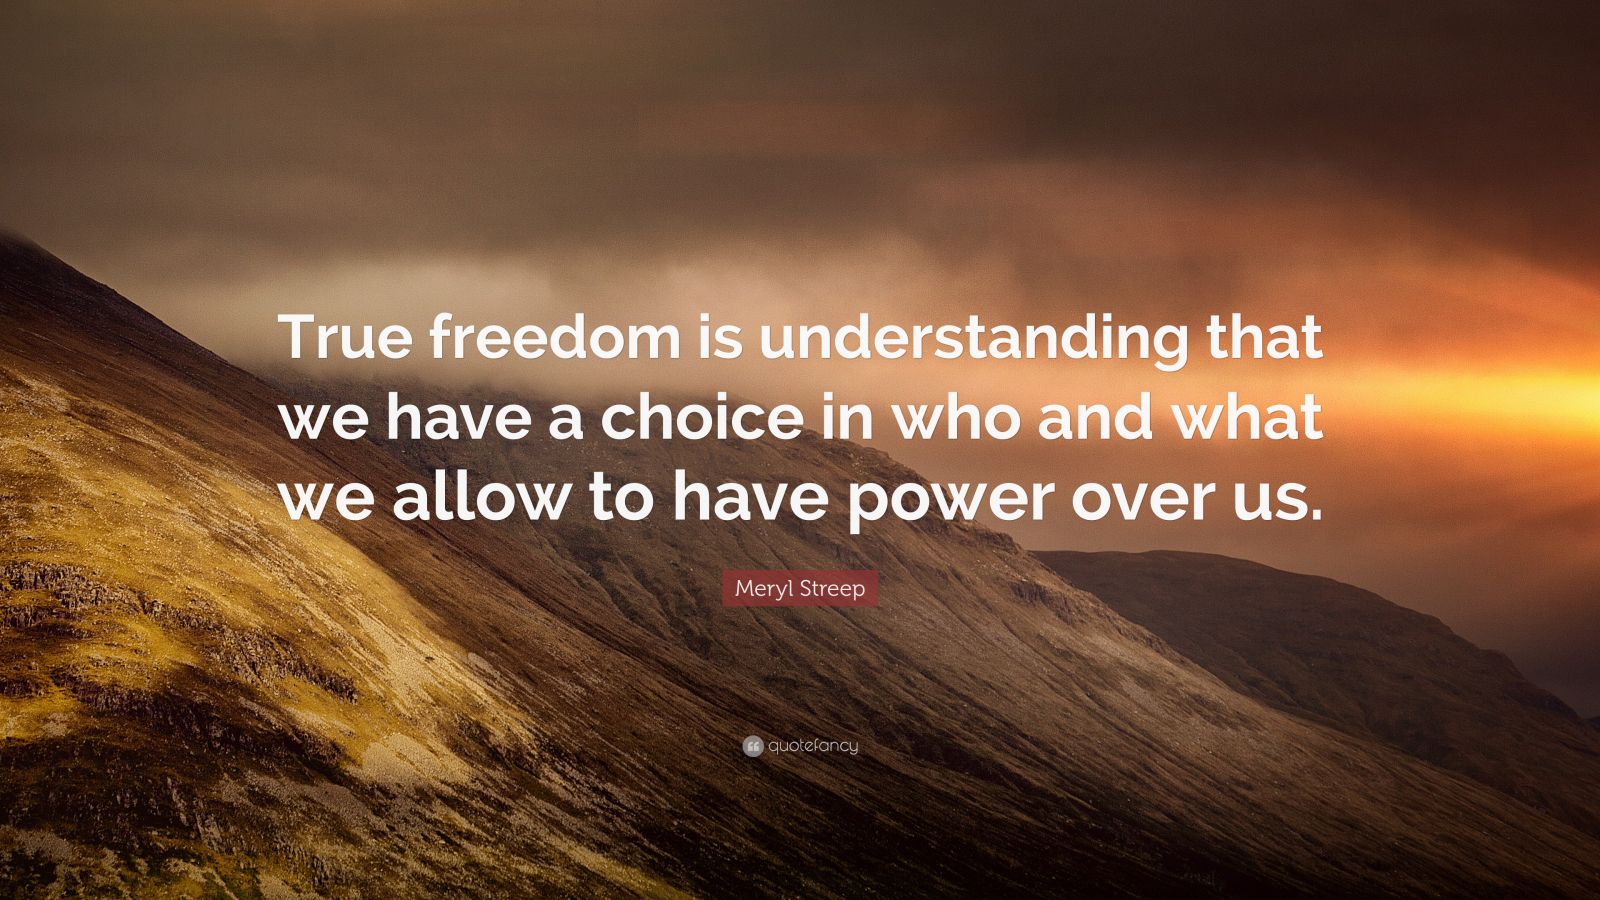 Meryl Streep Quote: “True freedom is understanding that we have a ...